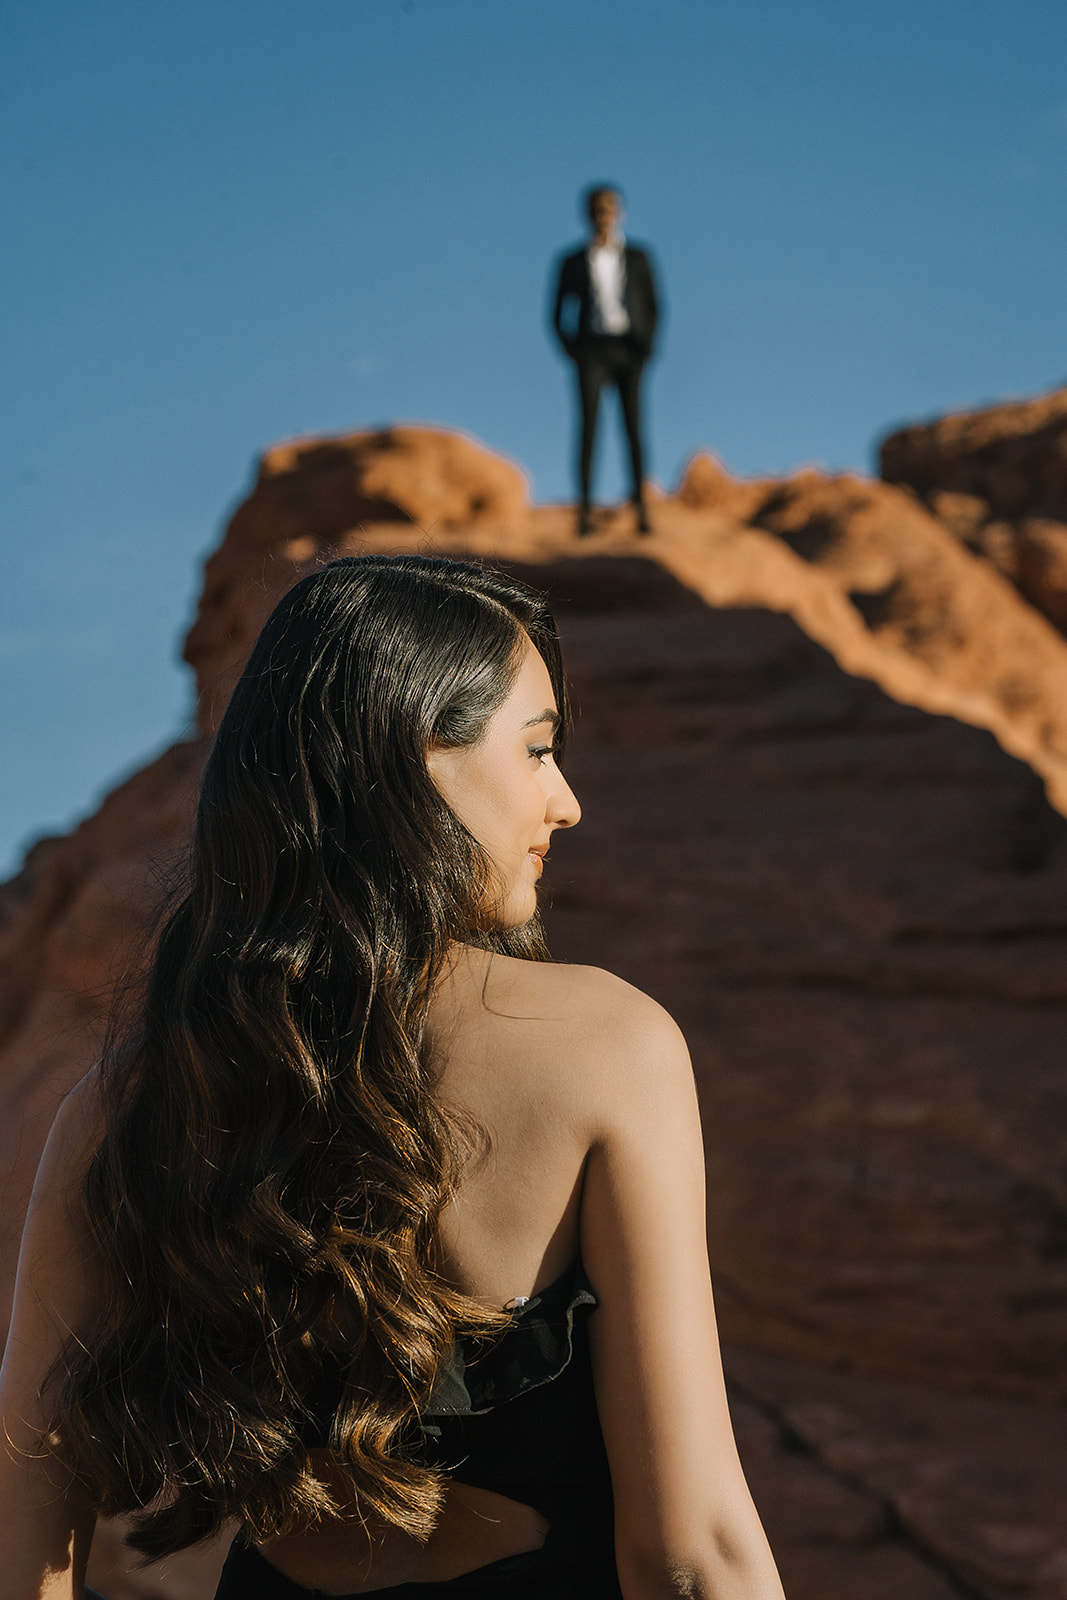 Valley of fire engagement photos las vegas